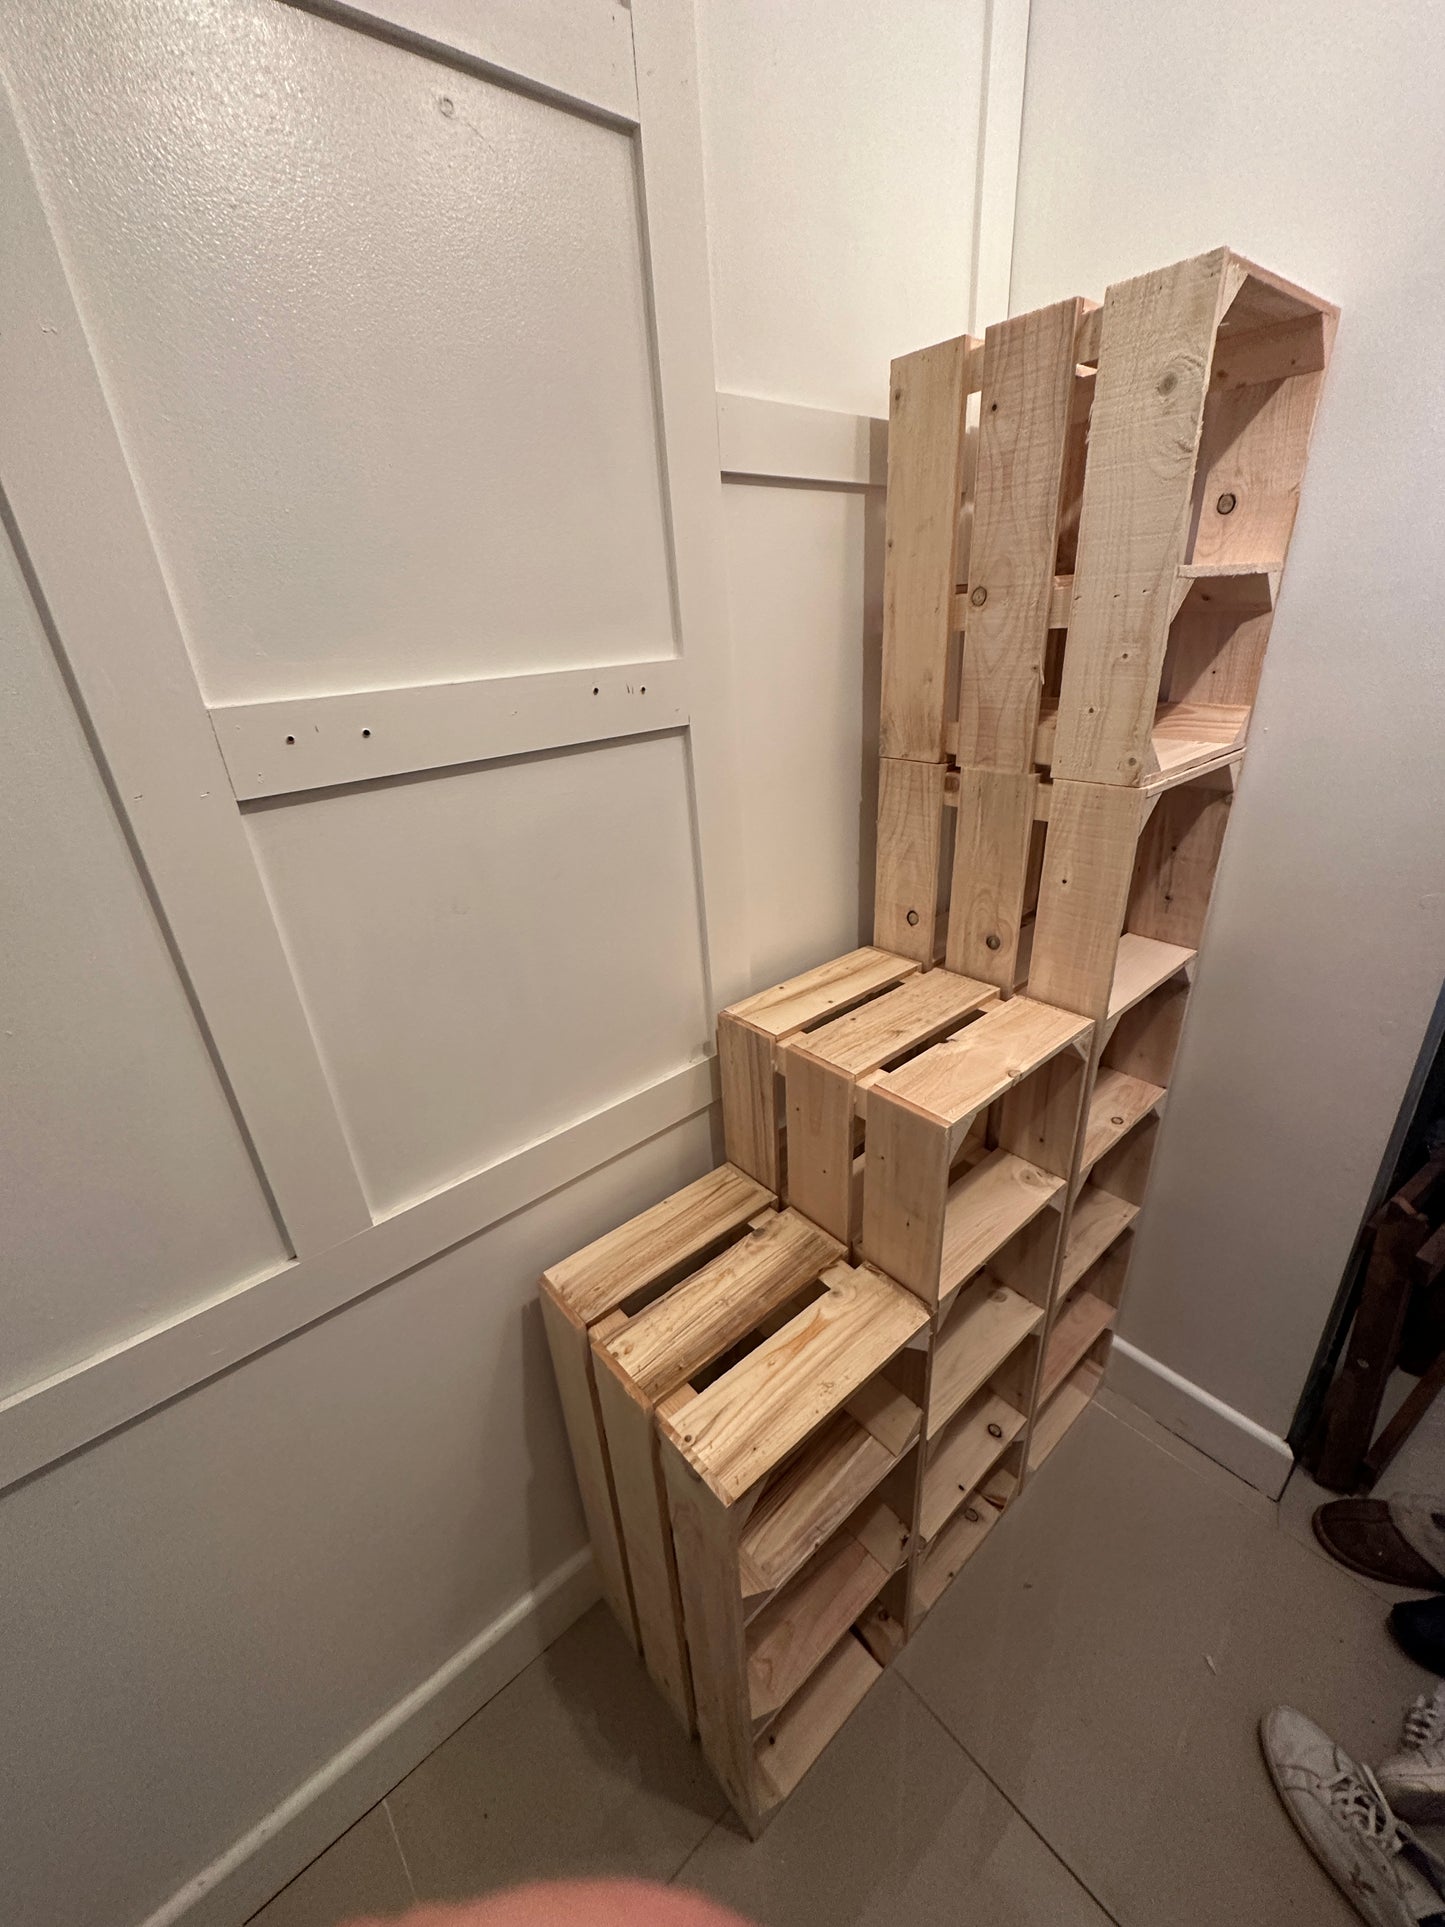 Tall SHOE RACK - Build your own, Various sizes, wooden rustic Orange crate shoe rack, narrow and tall shoe storage - Very deep